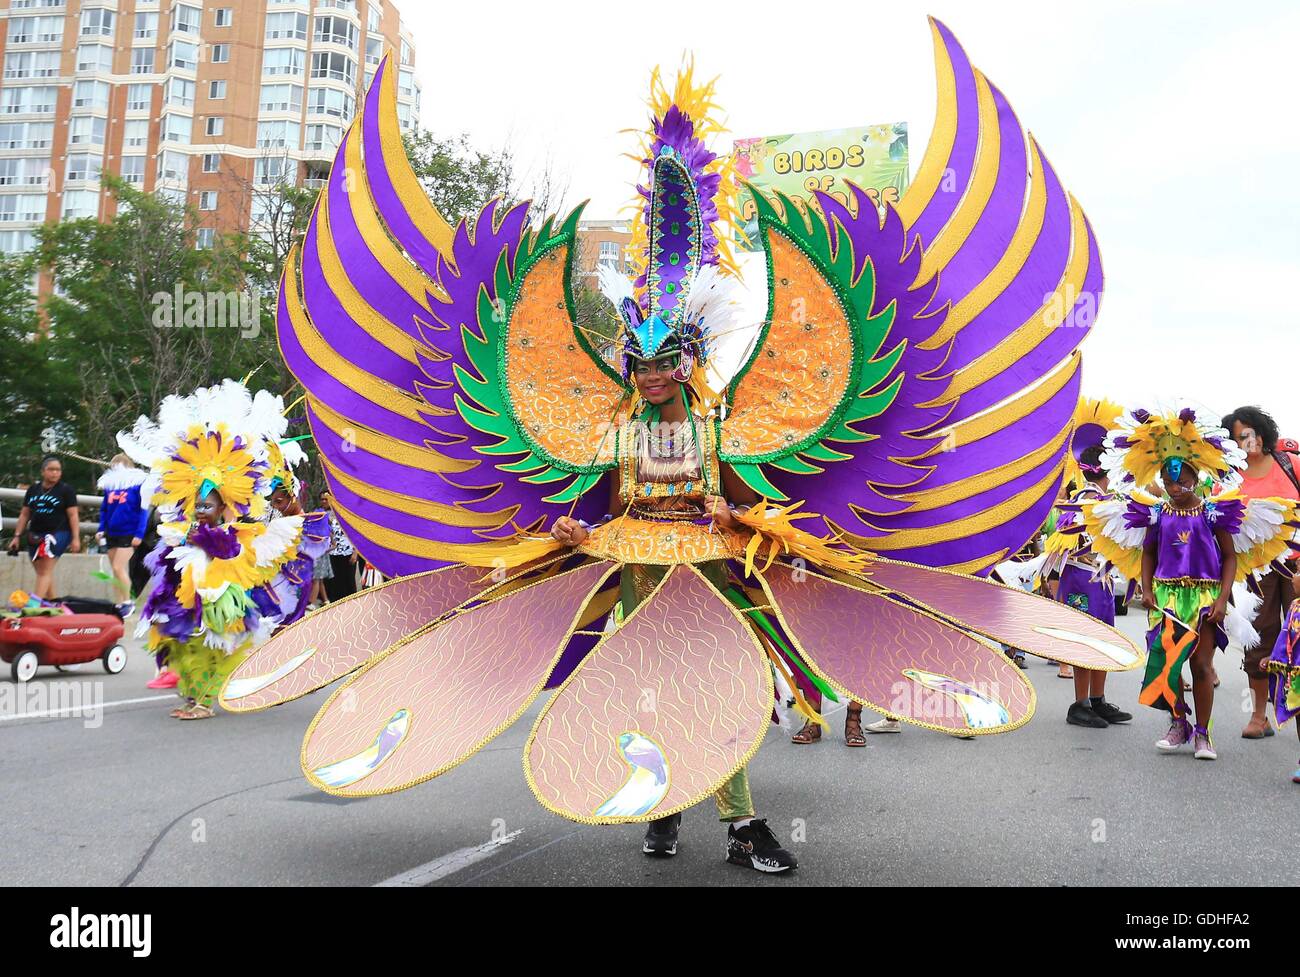 Toronto, Canada. 16th July, 2016. A girl attends the Junior Parade of the 2016 Caribbean Carnival in Toronto, Canada, July 16, 2016. Over 2,000 junior masqueraders took part in the annual traditional parade on Saturday. Credit:  Zou Zheng/Xinhua/Alamy Live News Stock Photo